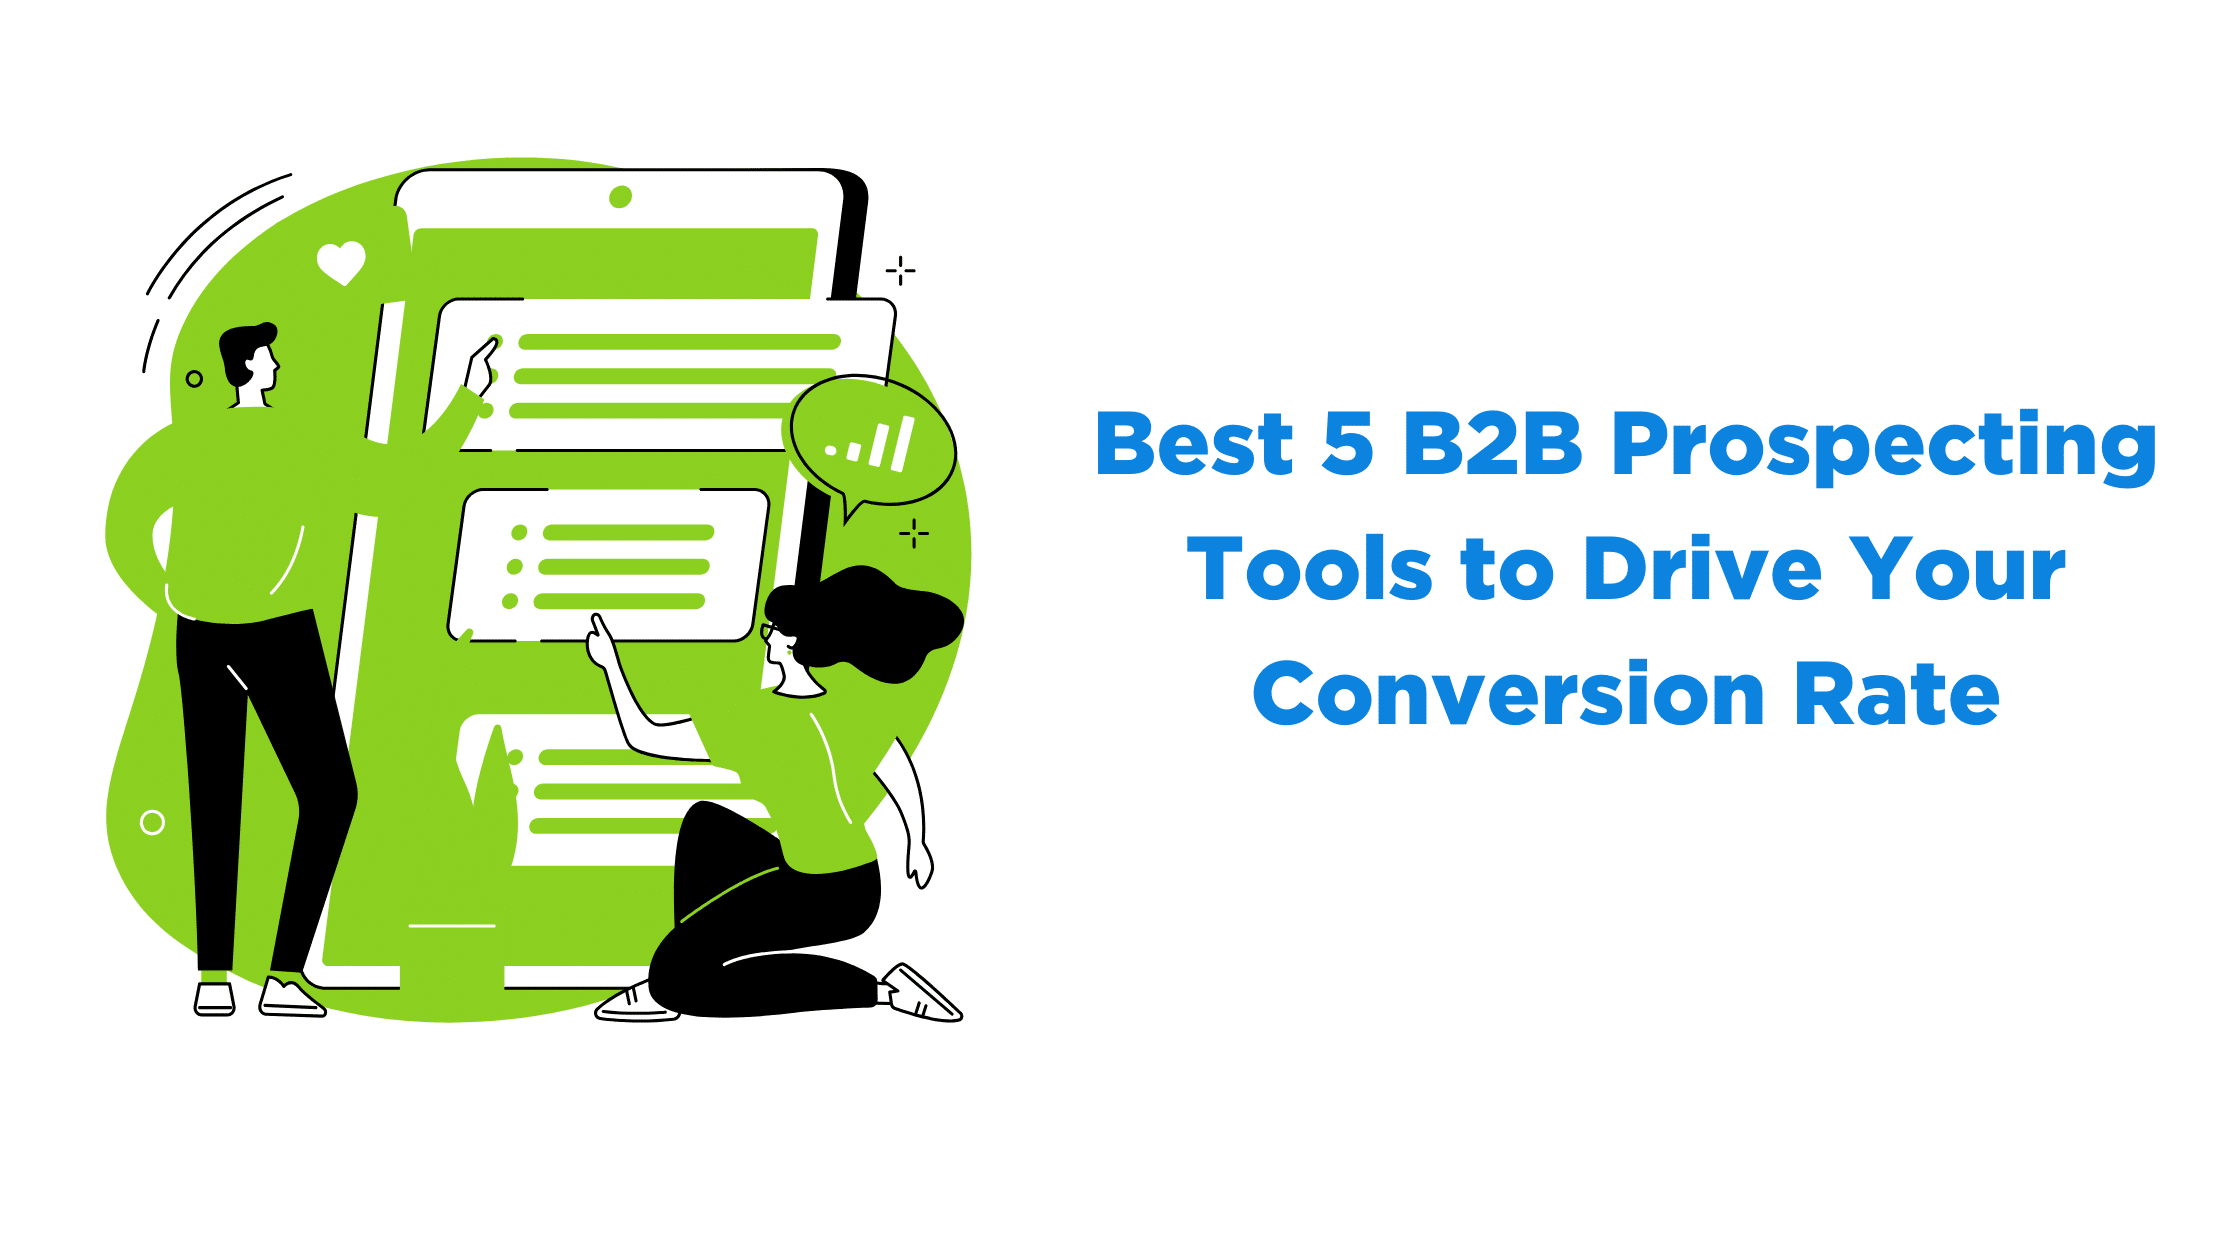 Best 5 B2B Prospecting Tools to Drive Your Conversion Rate